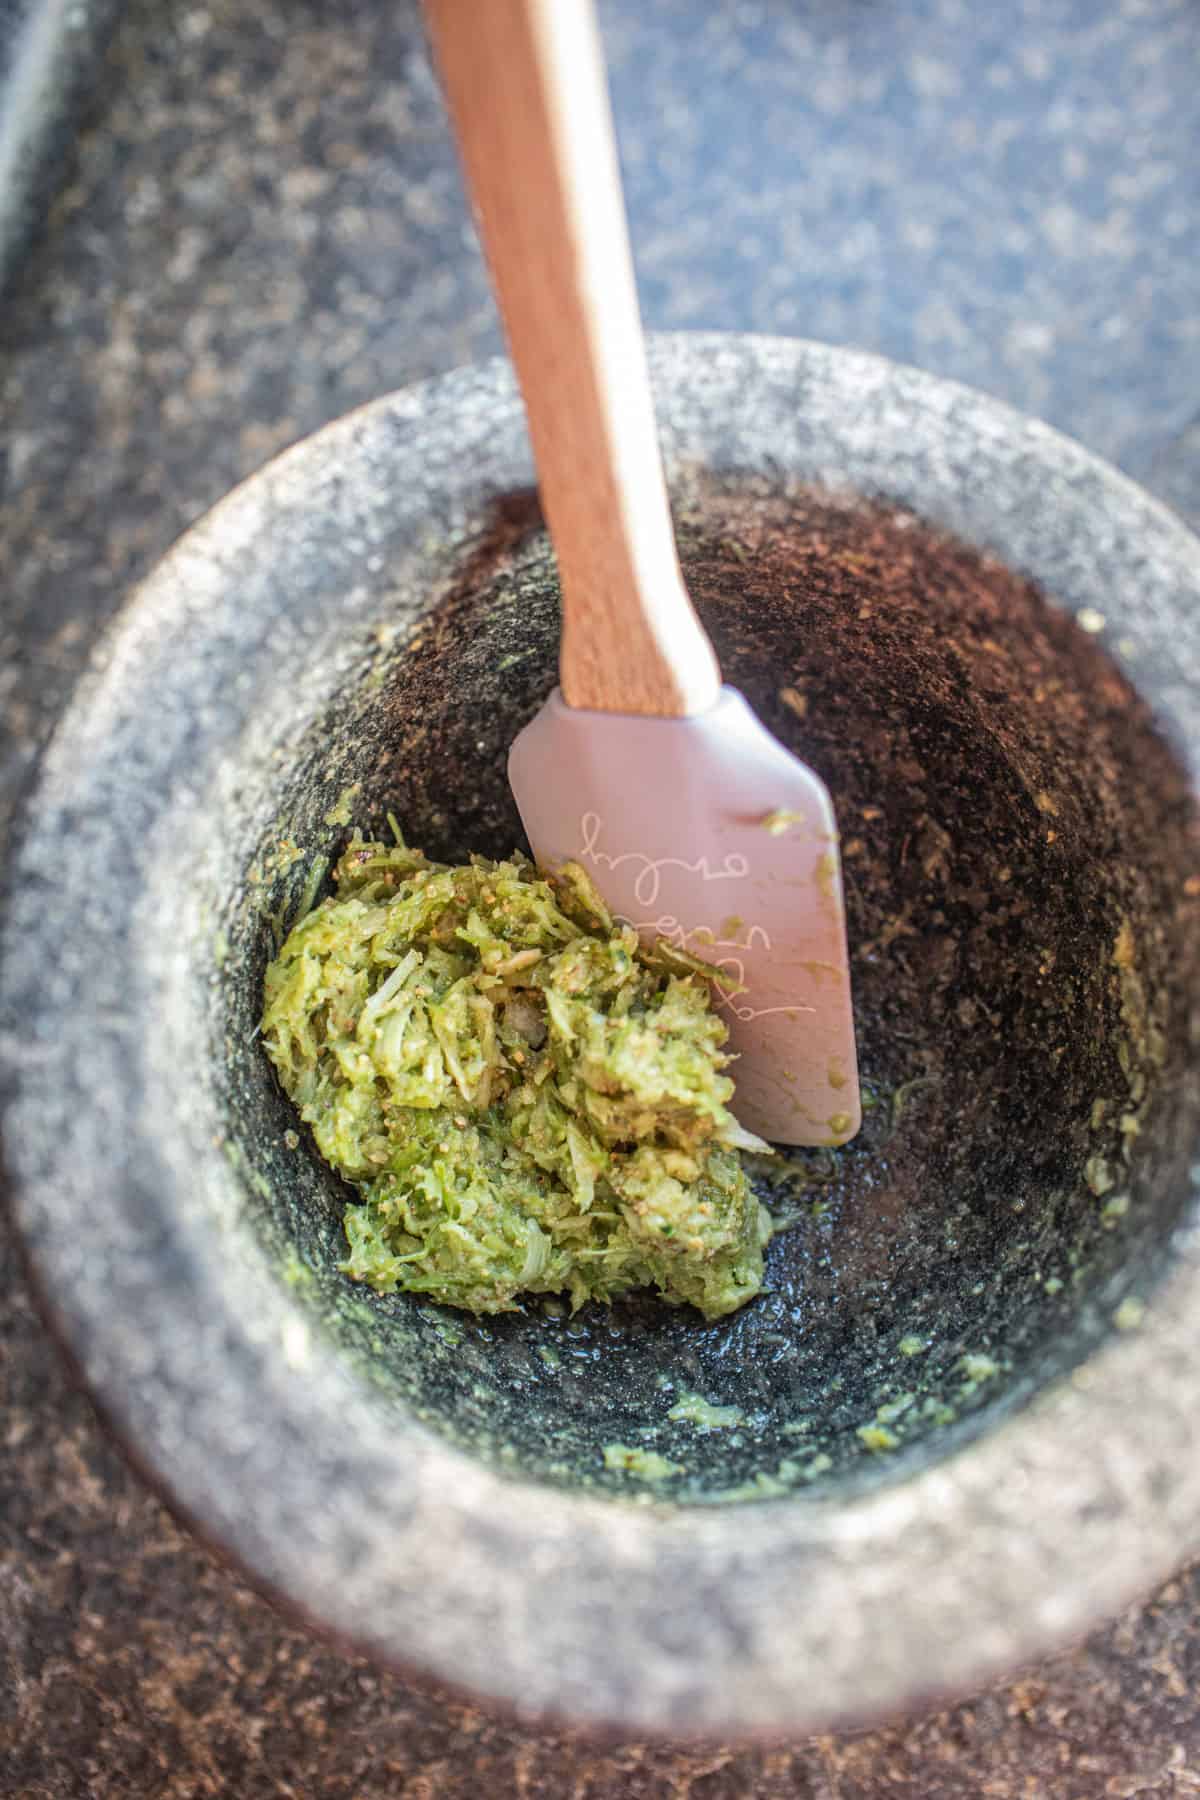 Green paste in a mortar.